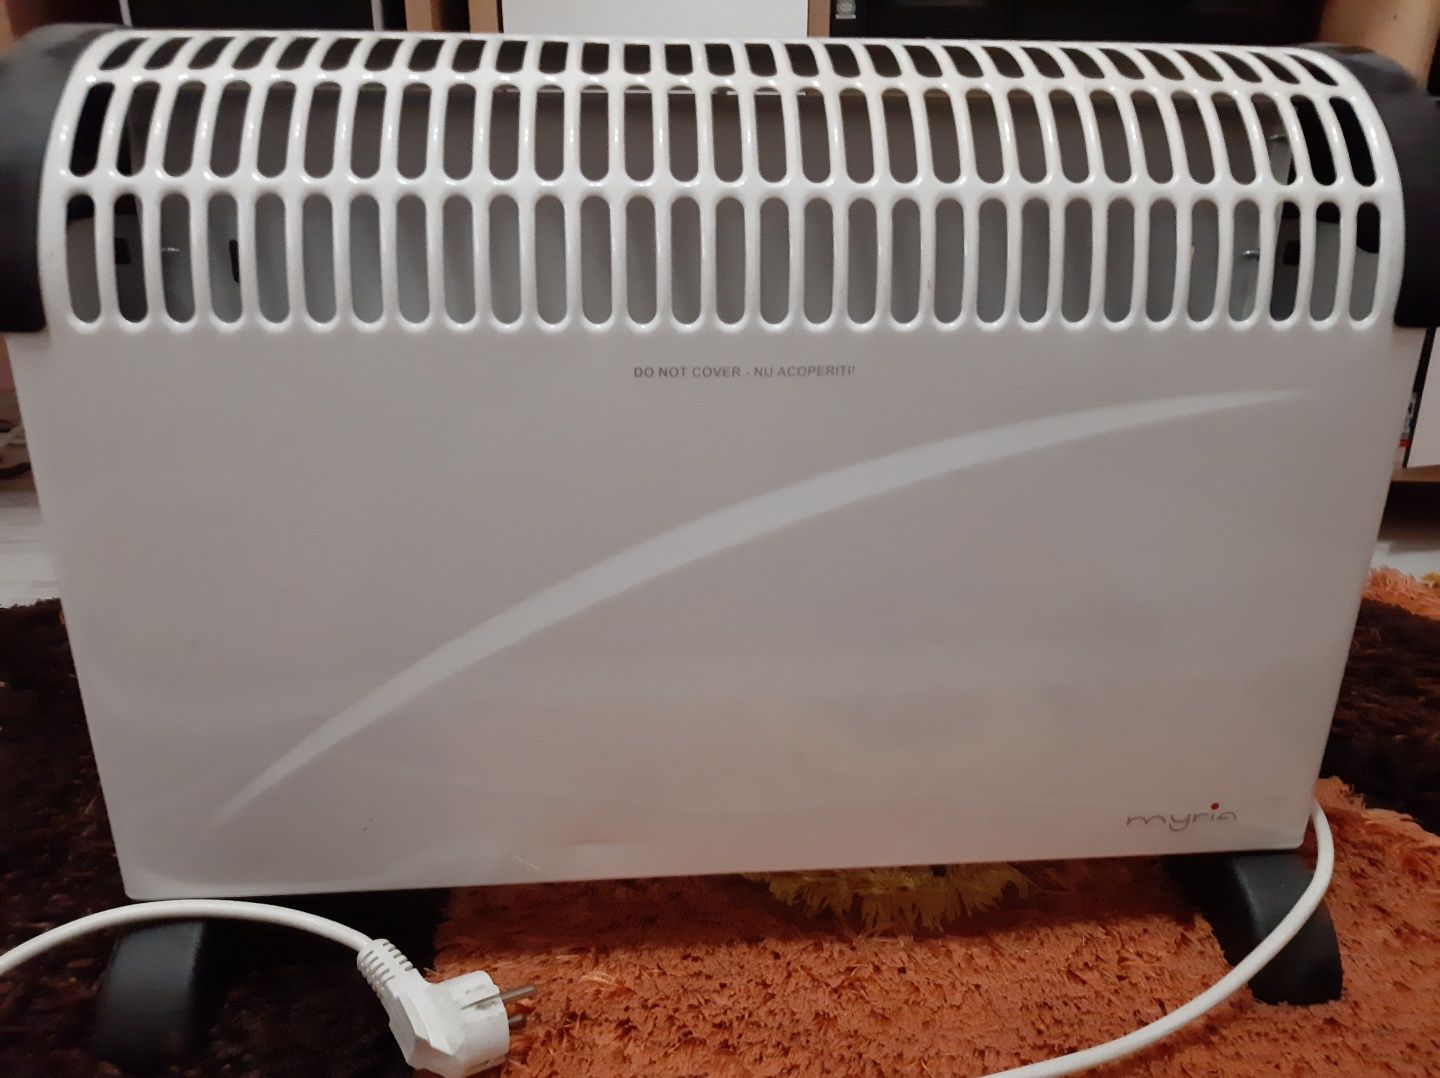 Convector electric 2000W